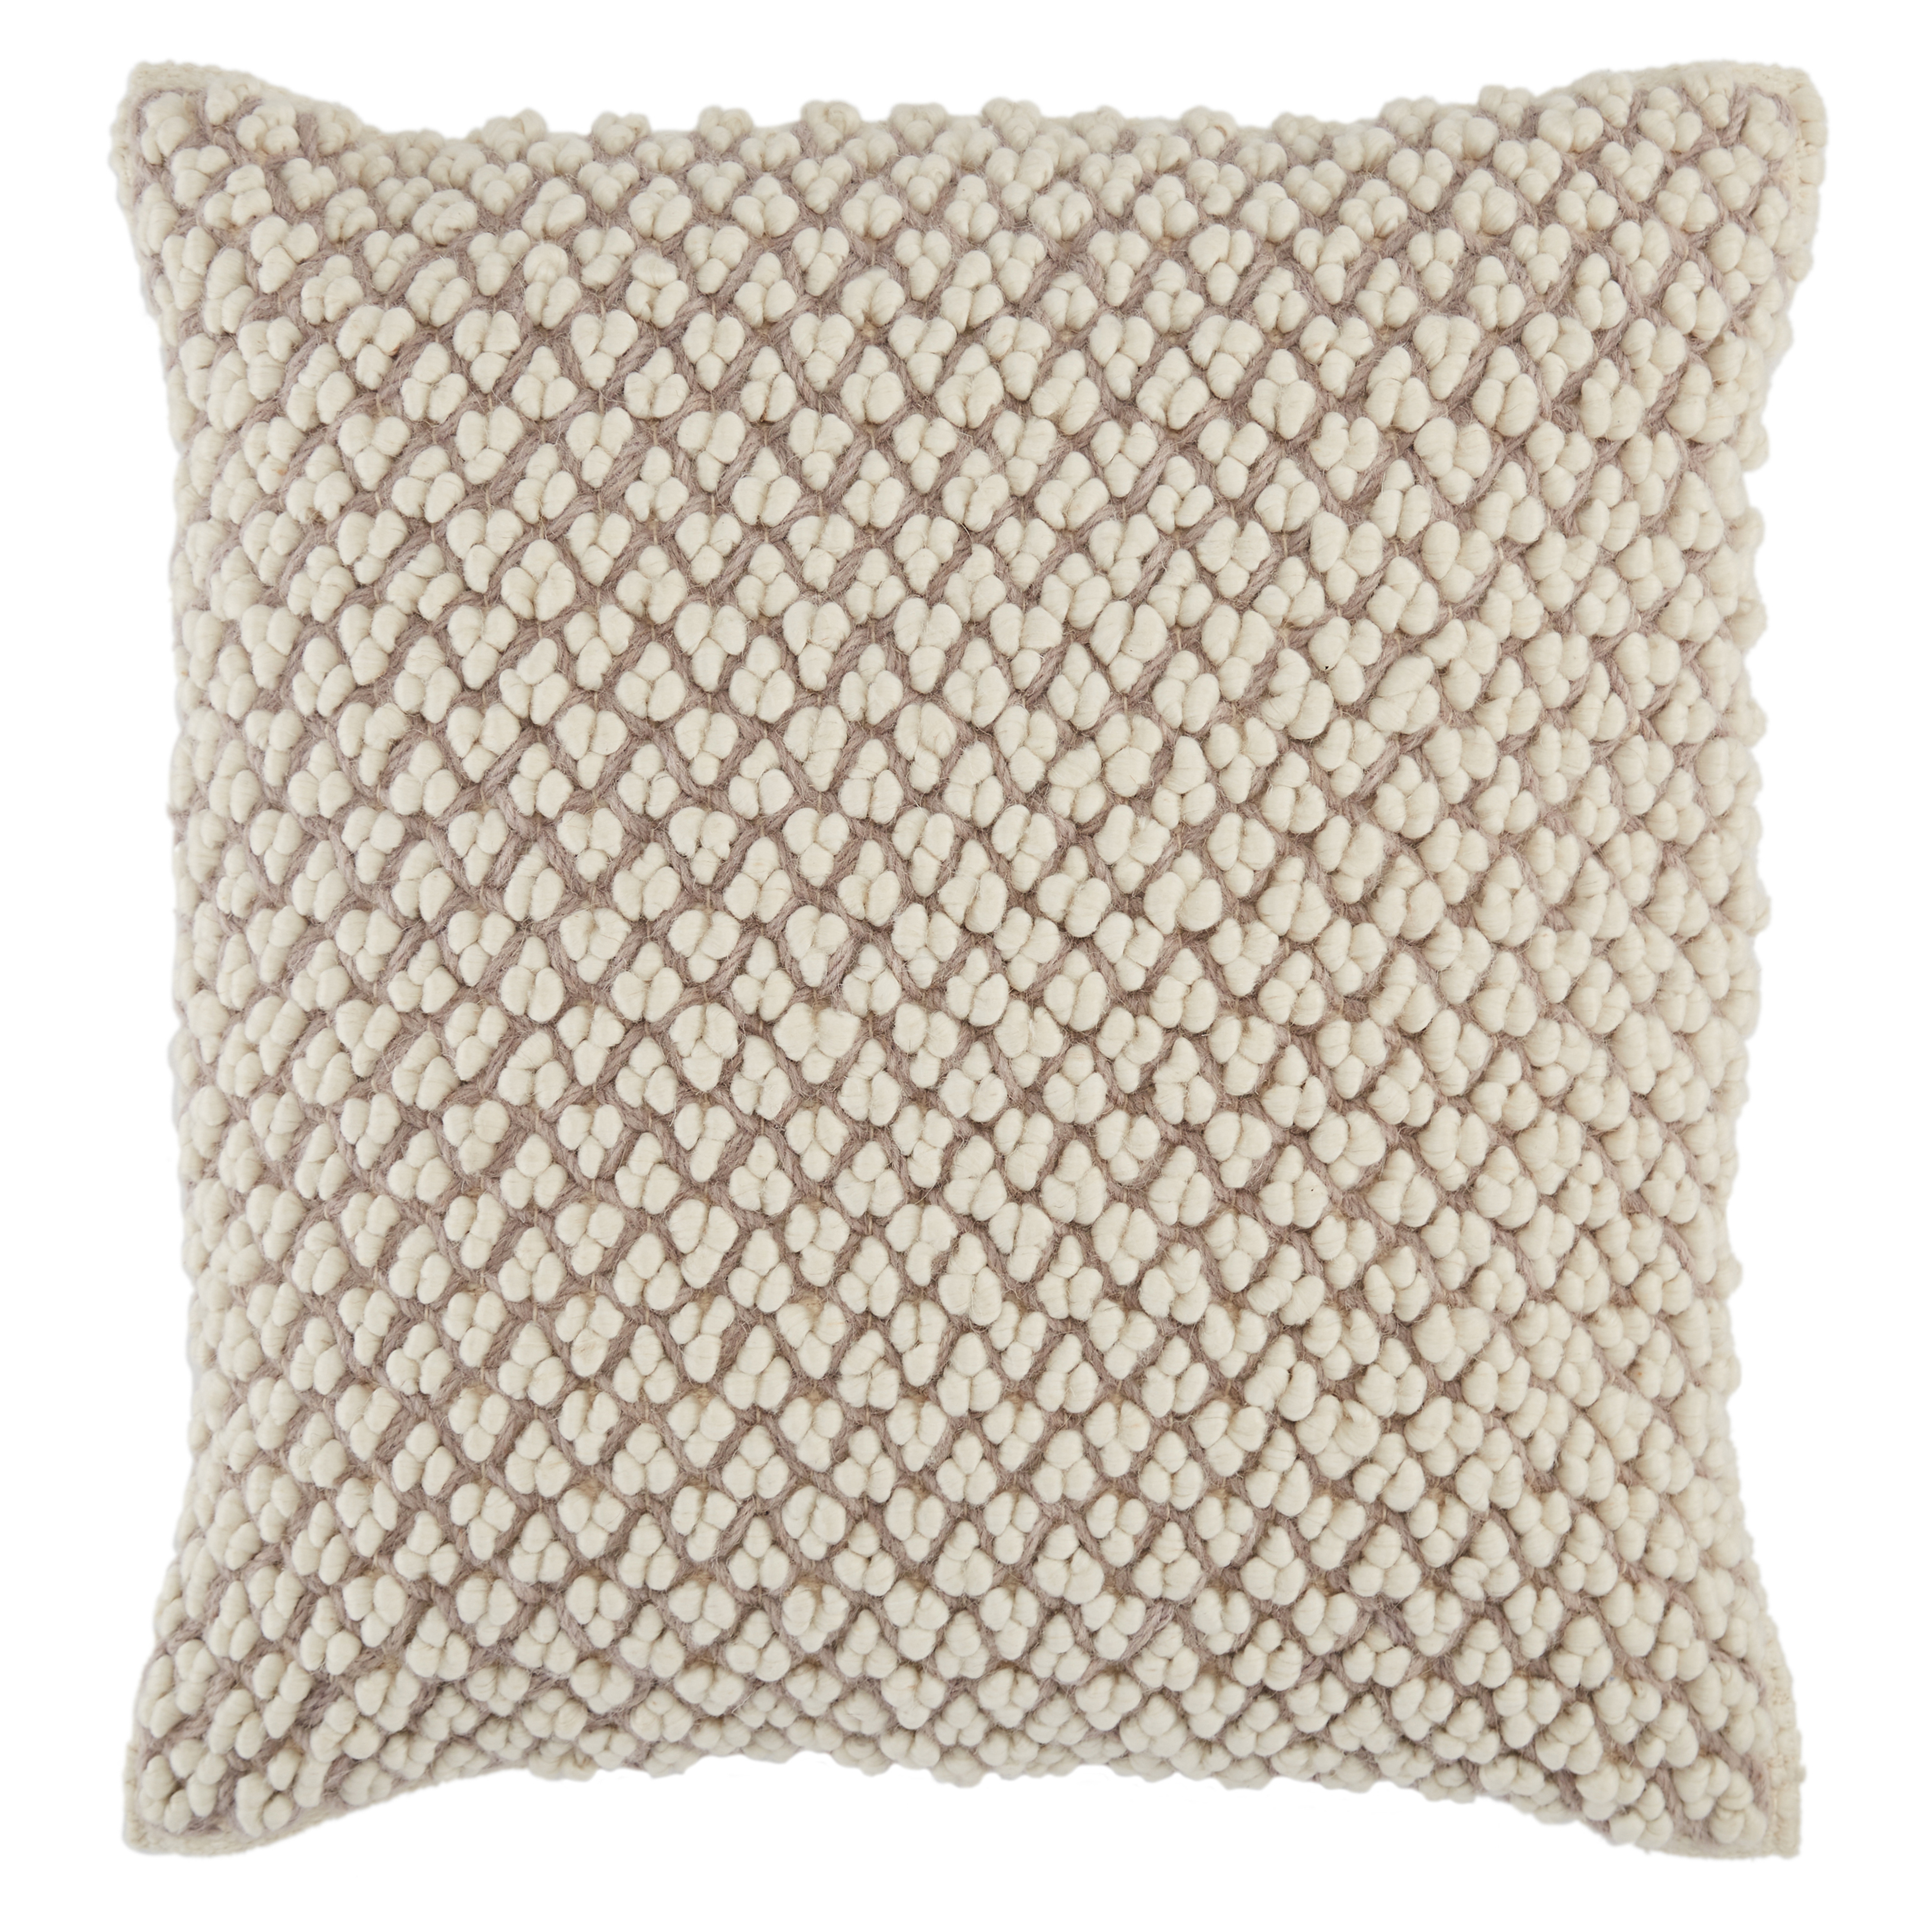 Design (US) Light Taupe 22"X22" Pillow - Collective Weavers